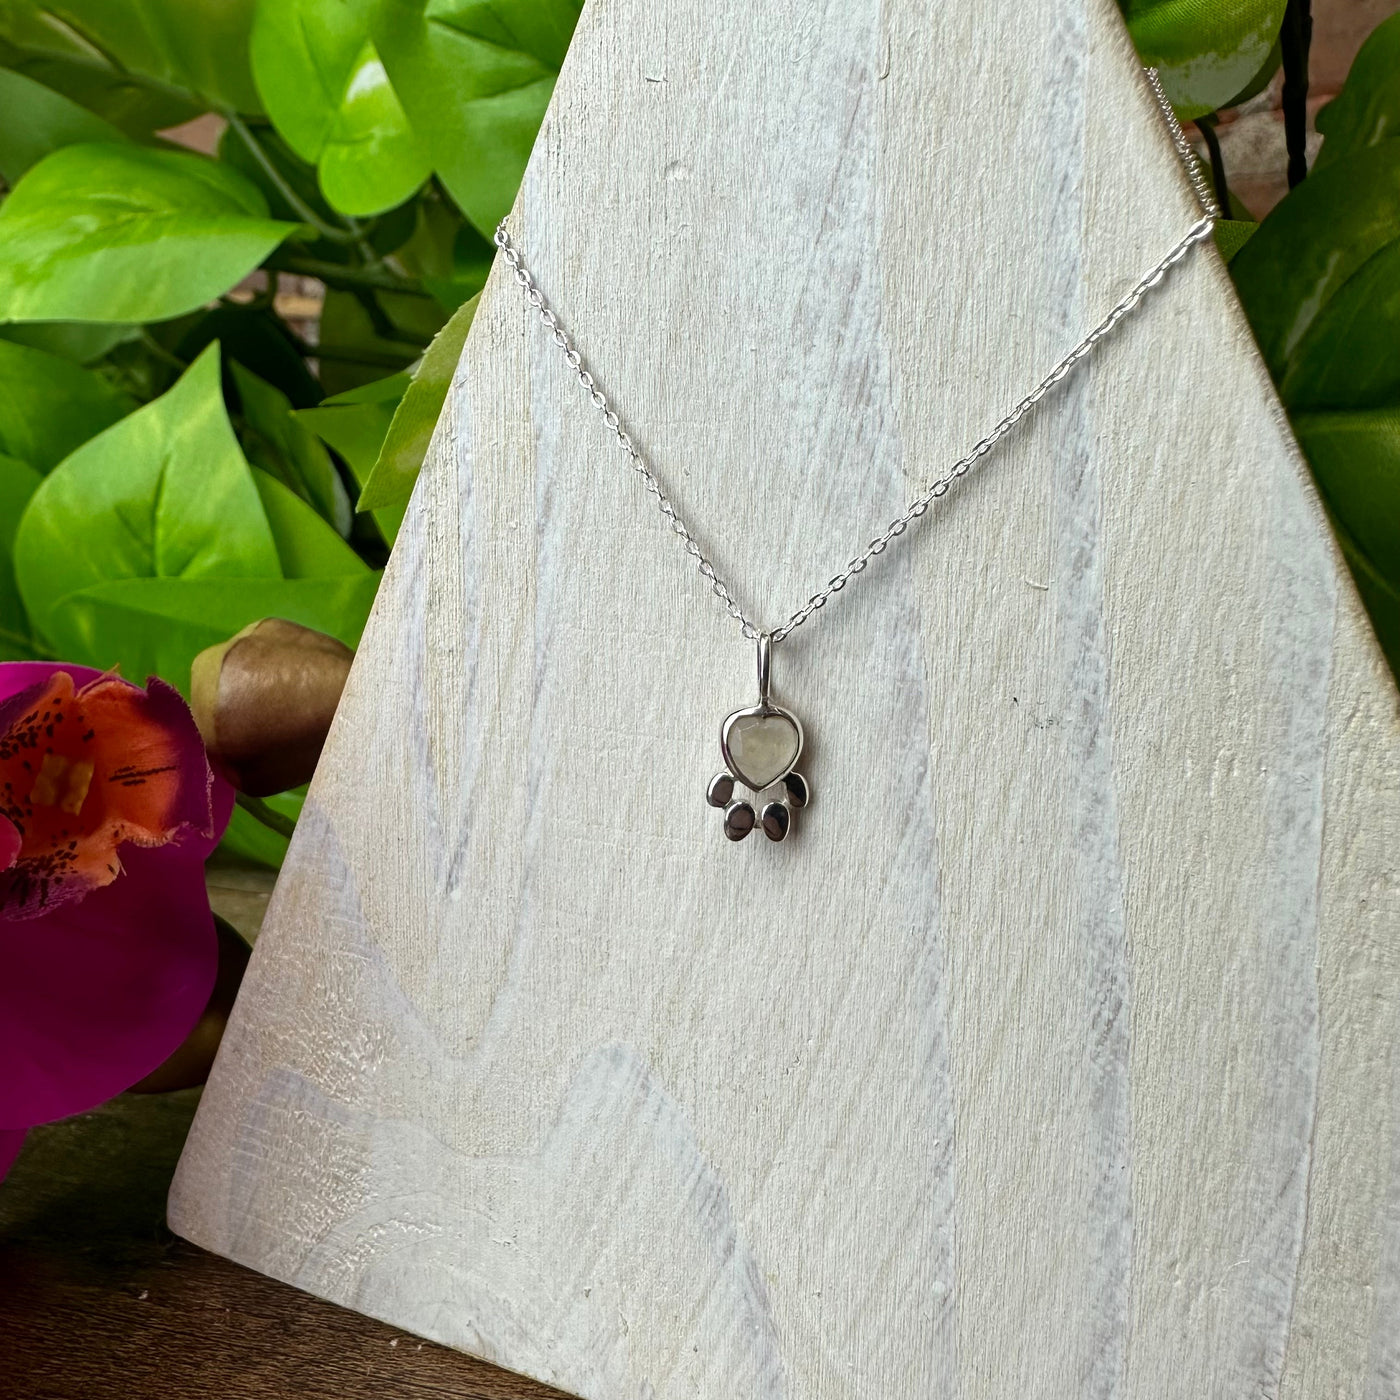 Rainbow Moonstone Paw Print Pendant Necklace with 16-18" Sterling Silver Adjustable Chain